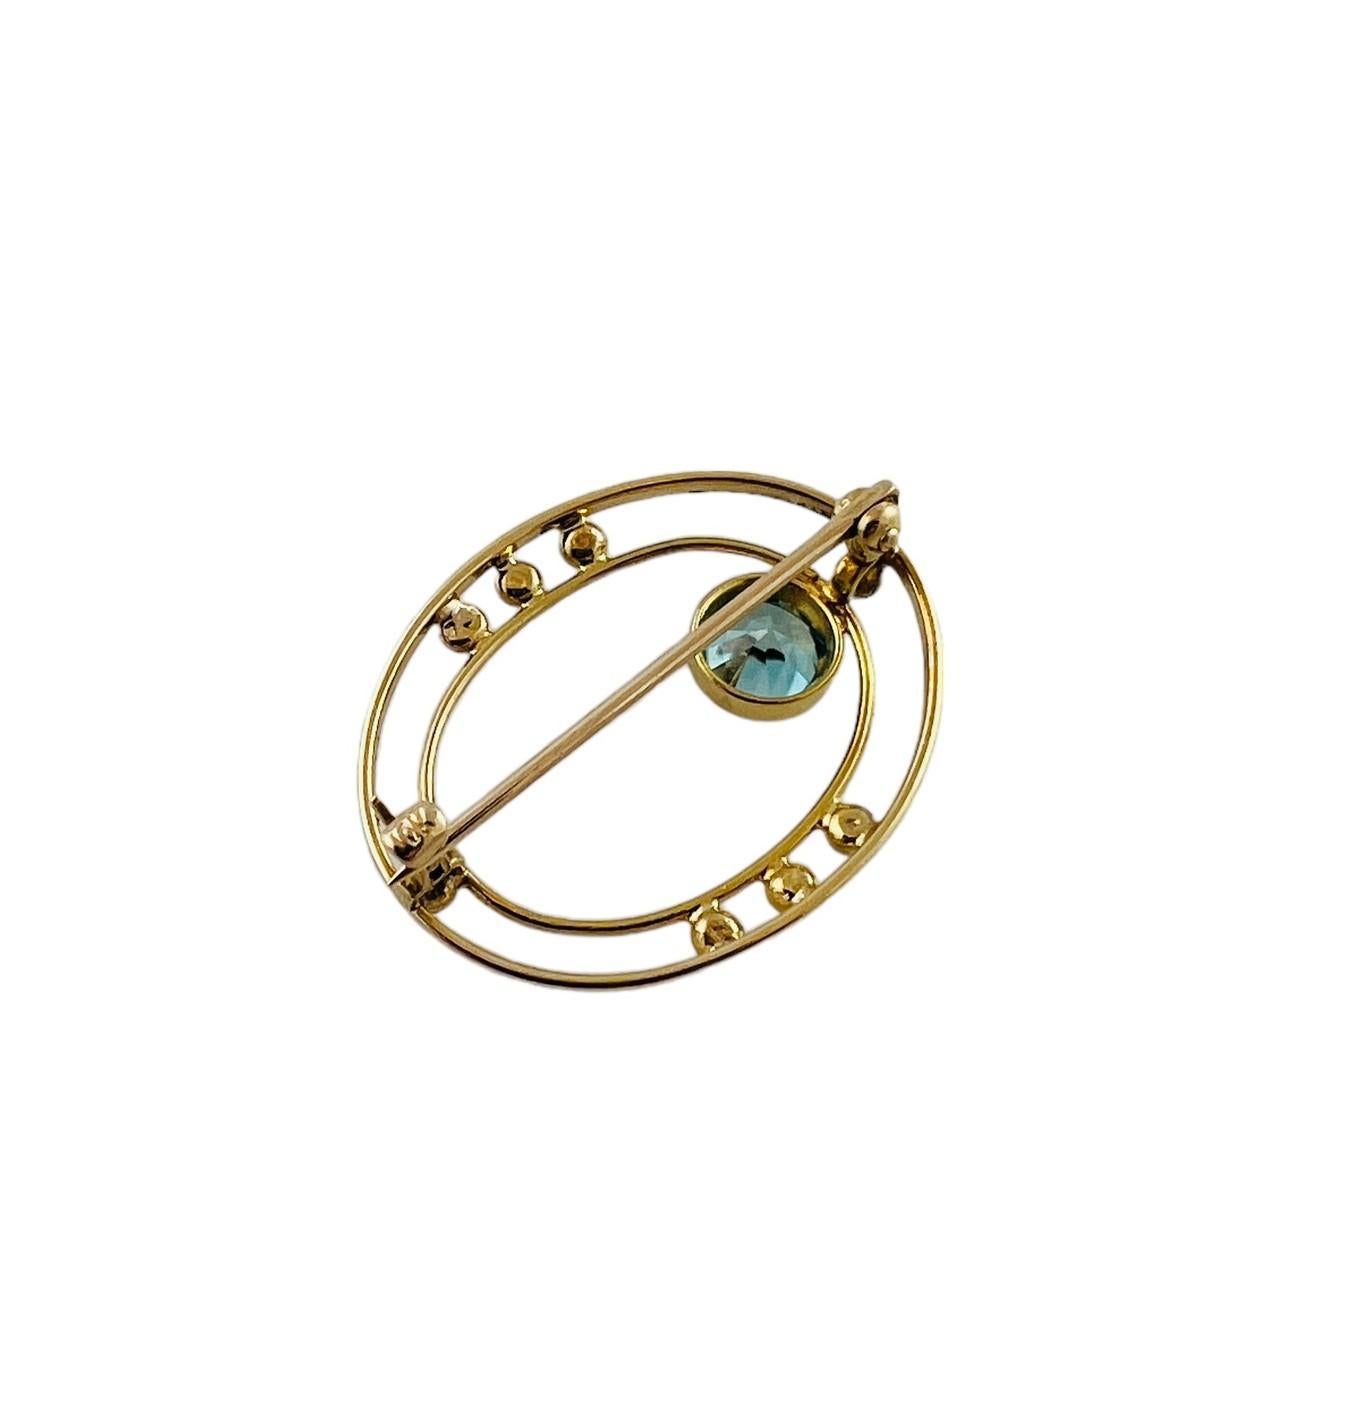 10K Yellow Gold Open Oval Blue Zircon Brooch

This beautiful pin is set in 10K yellow gold. 

The pin is accented by a bezel set faceted light blue zircon stone

Size 27.2 x 21.1 x 4.2 mm

2.1 g / 1.3 dwt

Acid Tested for 10K

Very good preowned